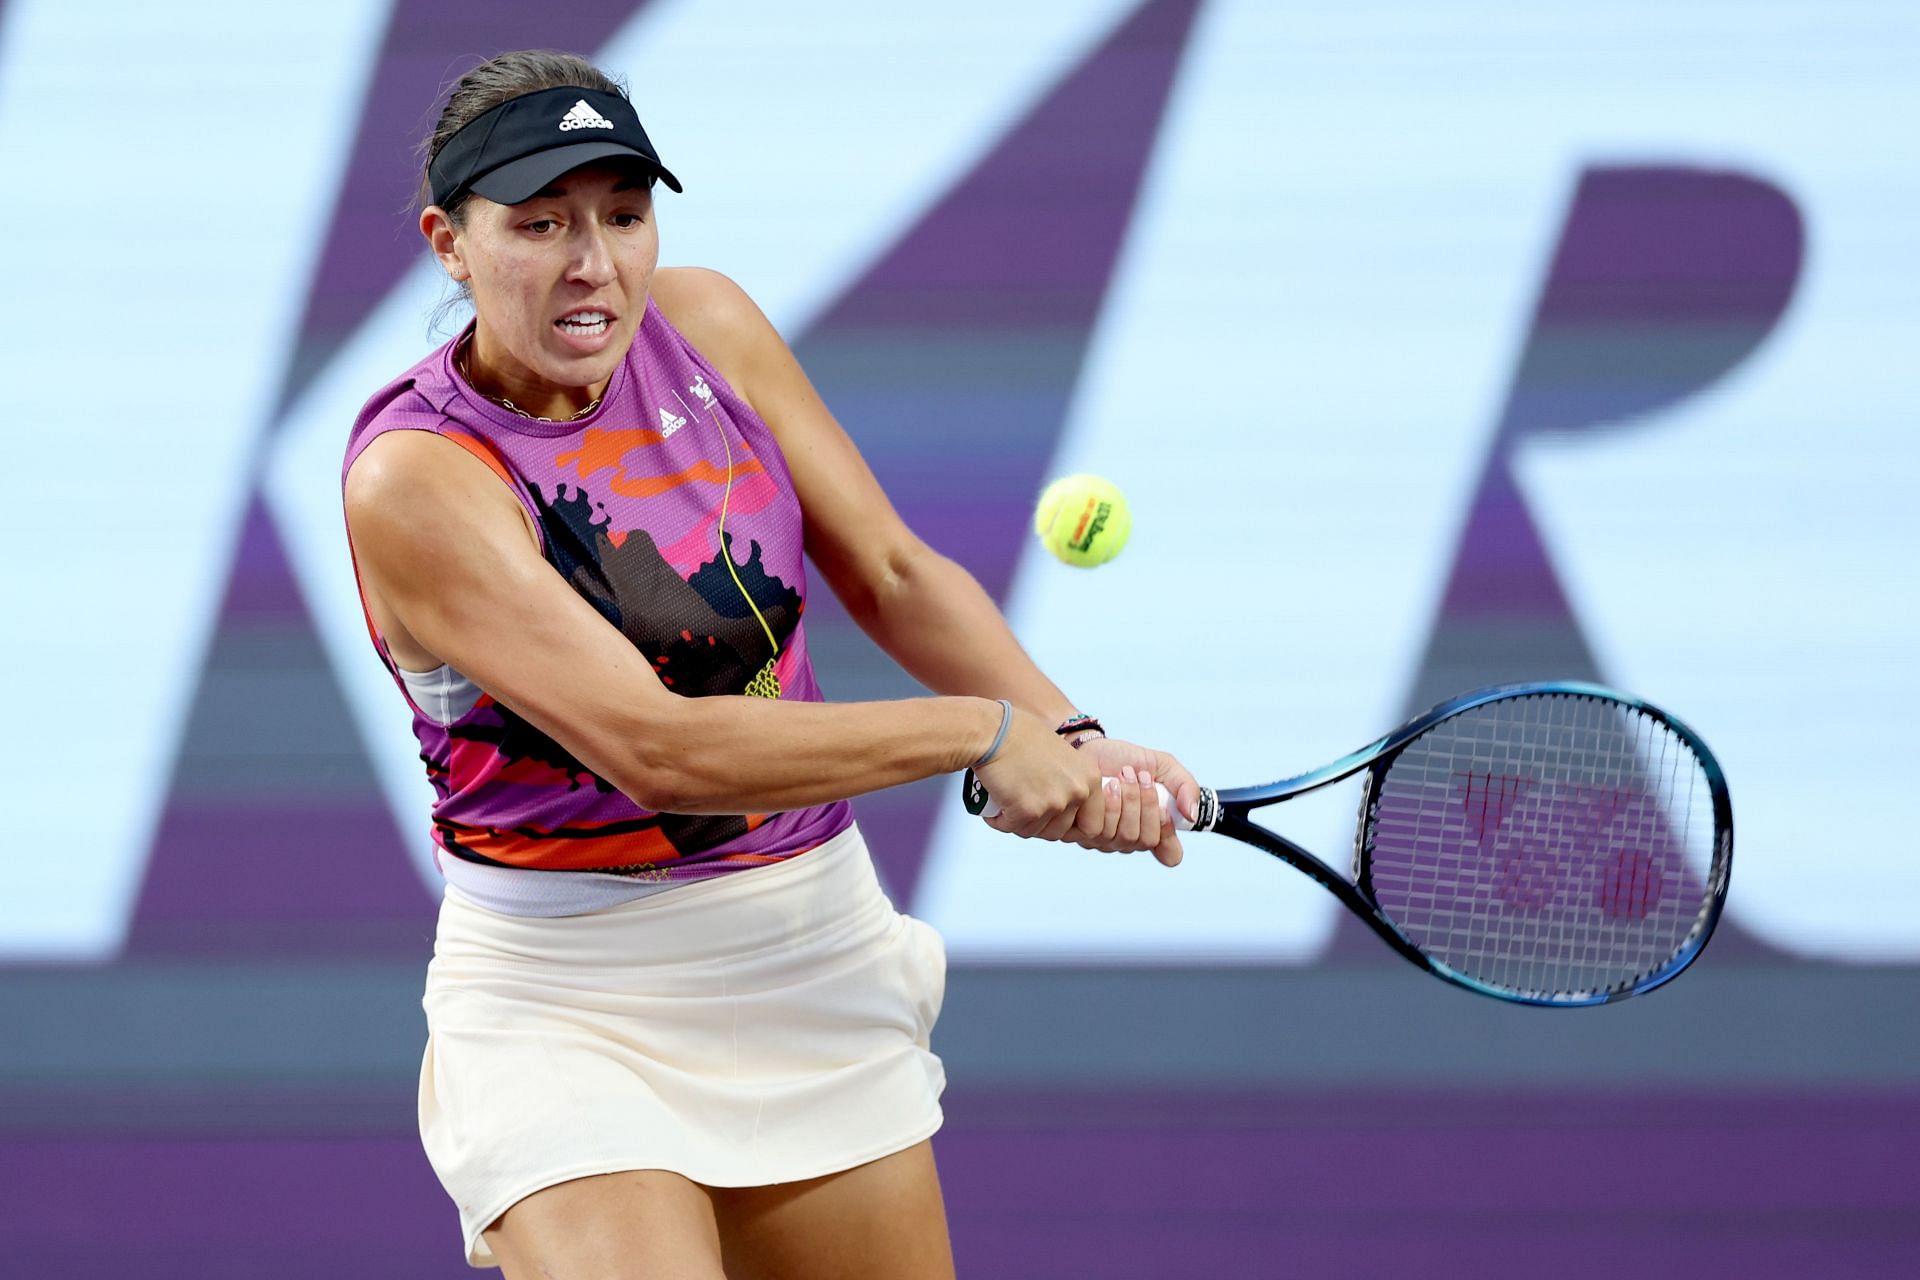 WTA Finals 2022 Schedule Today TV schedule, start time, order of play, live stream details and more Day 3